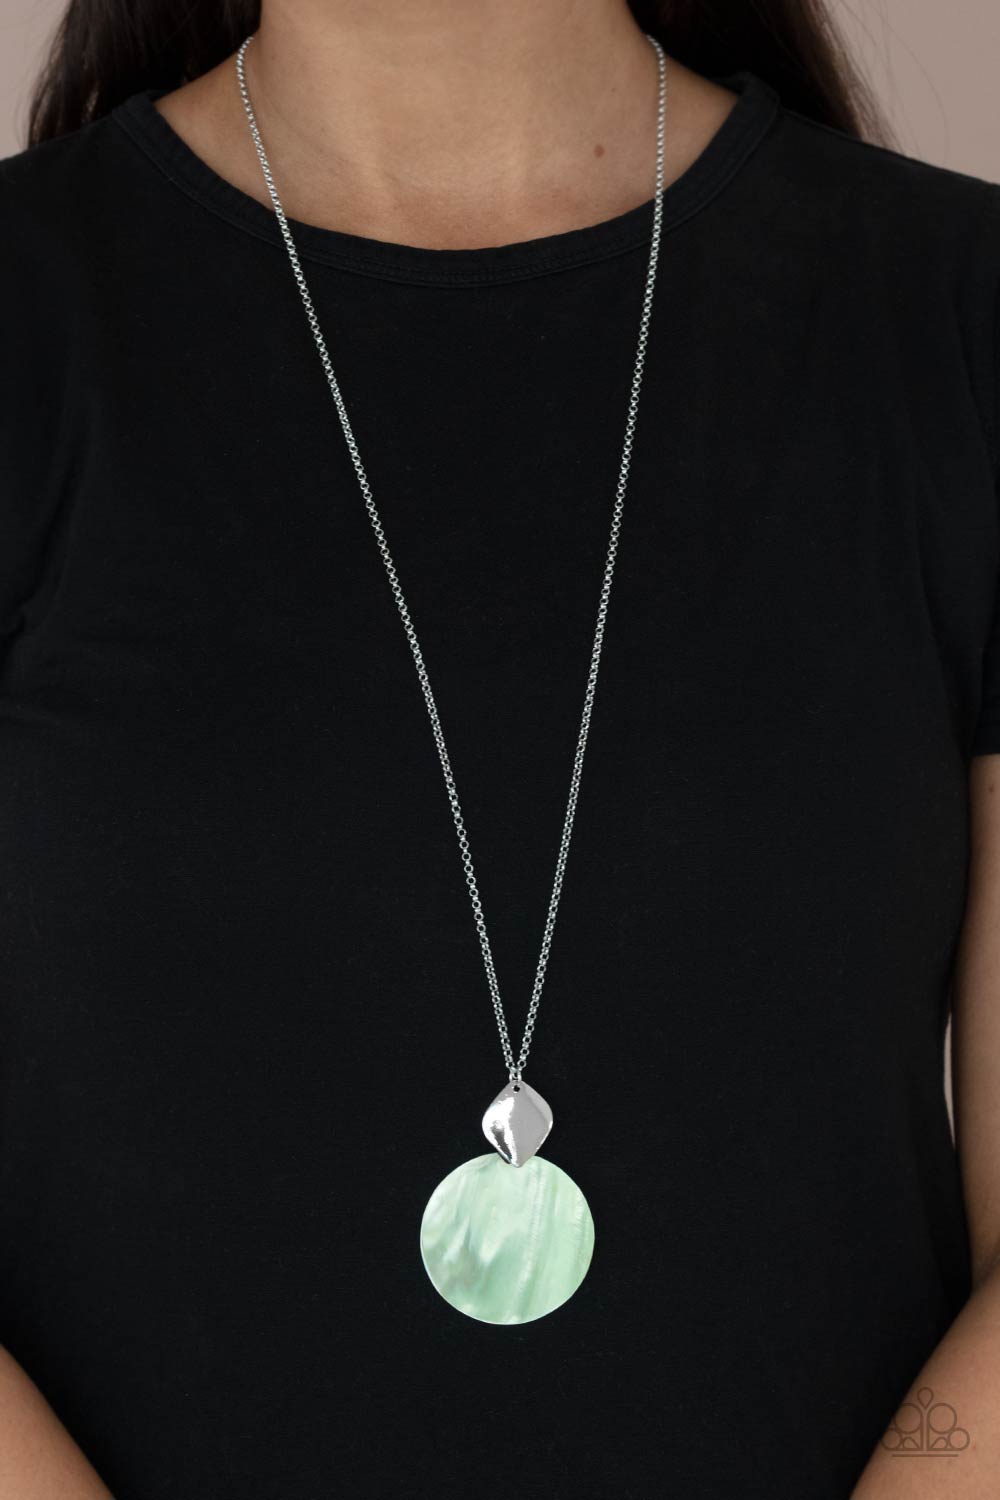 Tidal Tease Necklace - Green